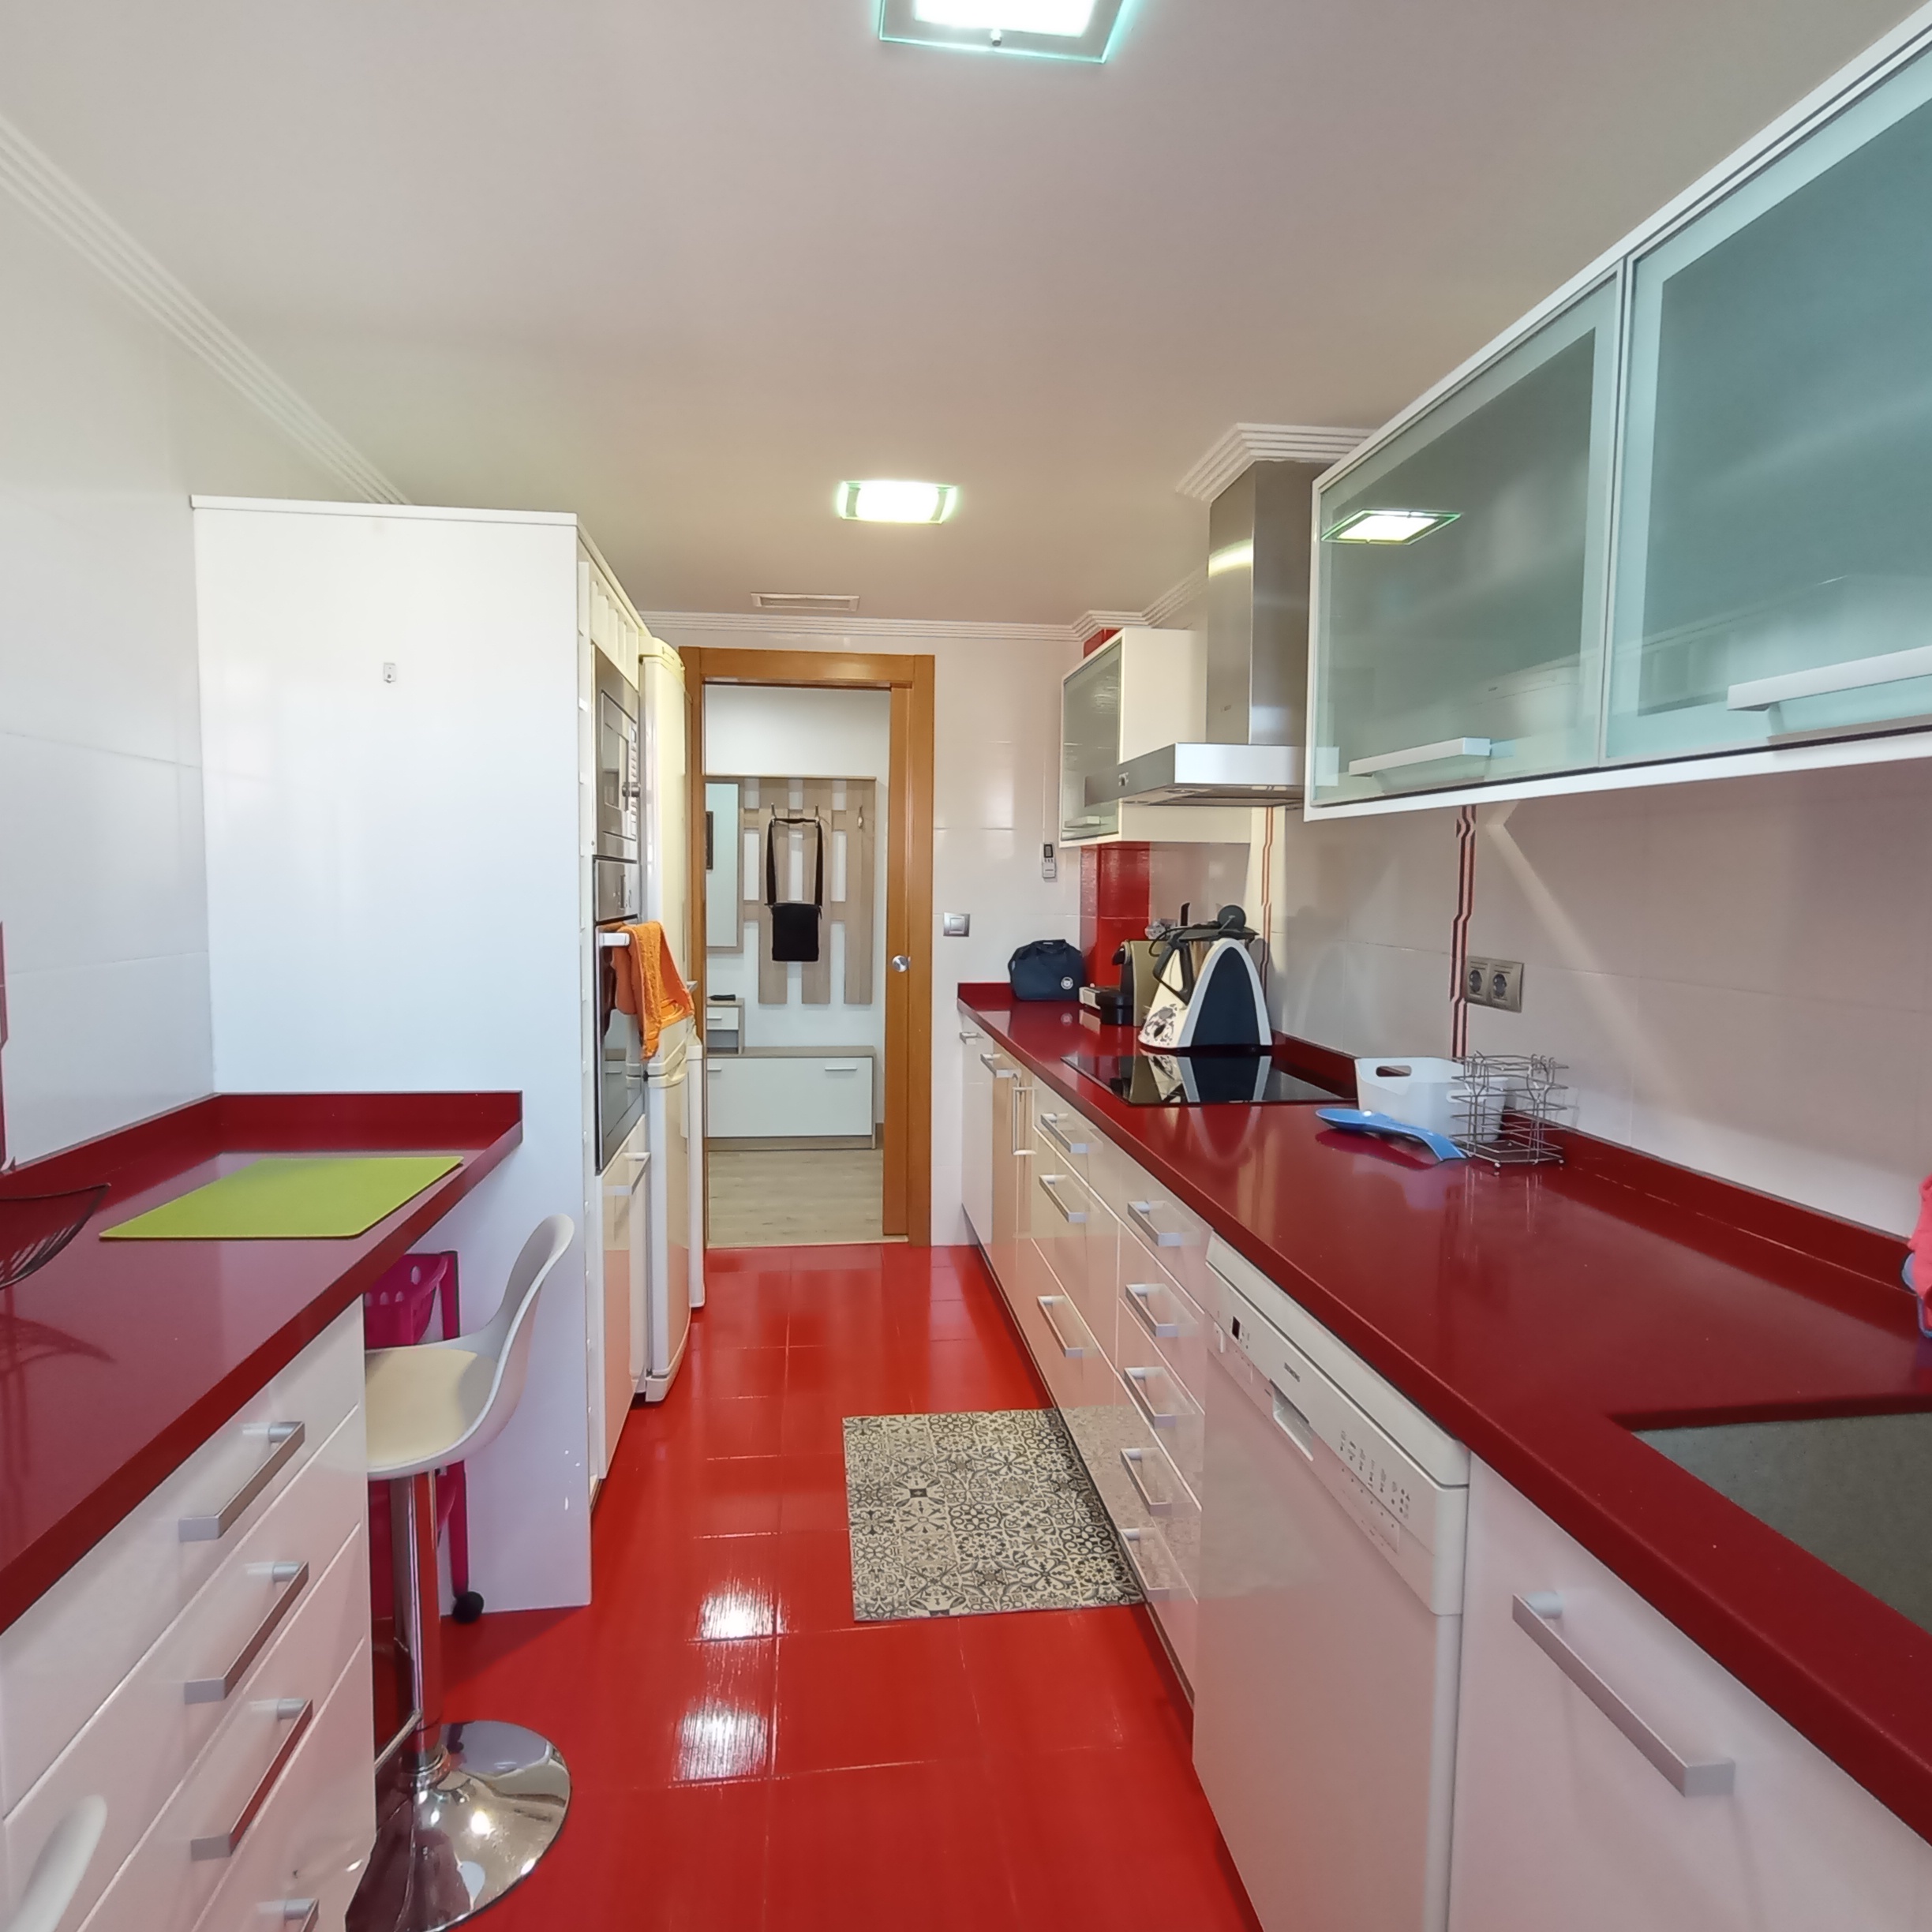 Escultor - 3 Bedroom apartment for rent in Valencia kitchen 1